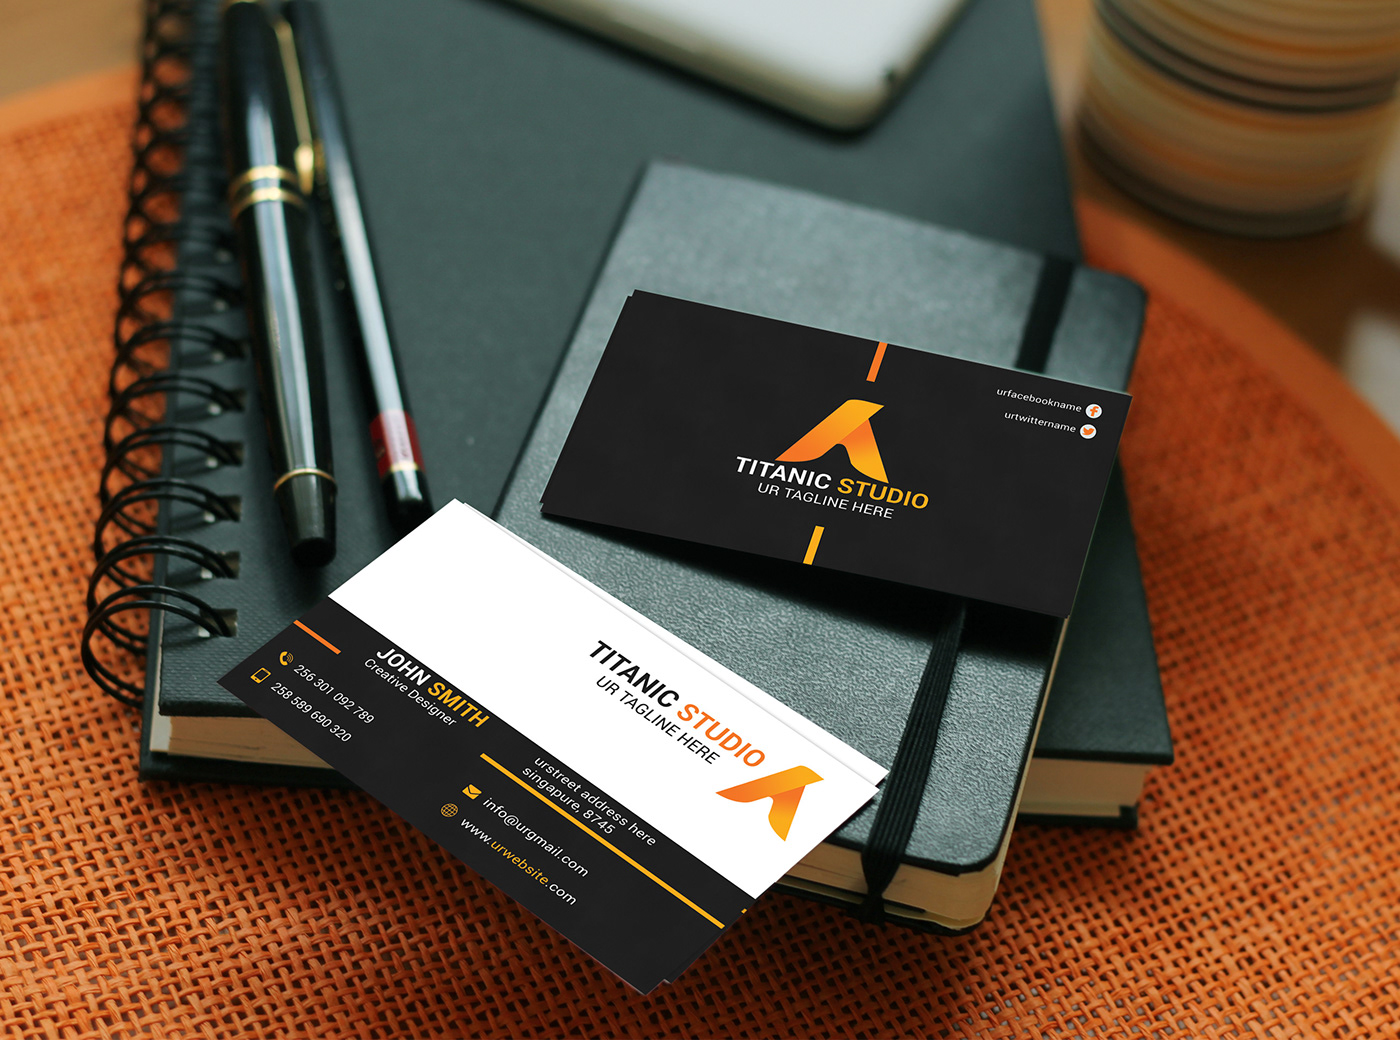 business cards templates Business Cards free unique Business card size business card design ideas vistaprint free business cards business cards cheap Business card design